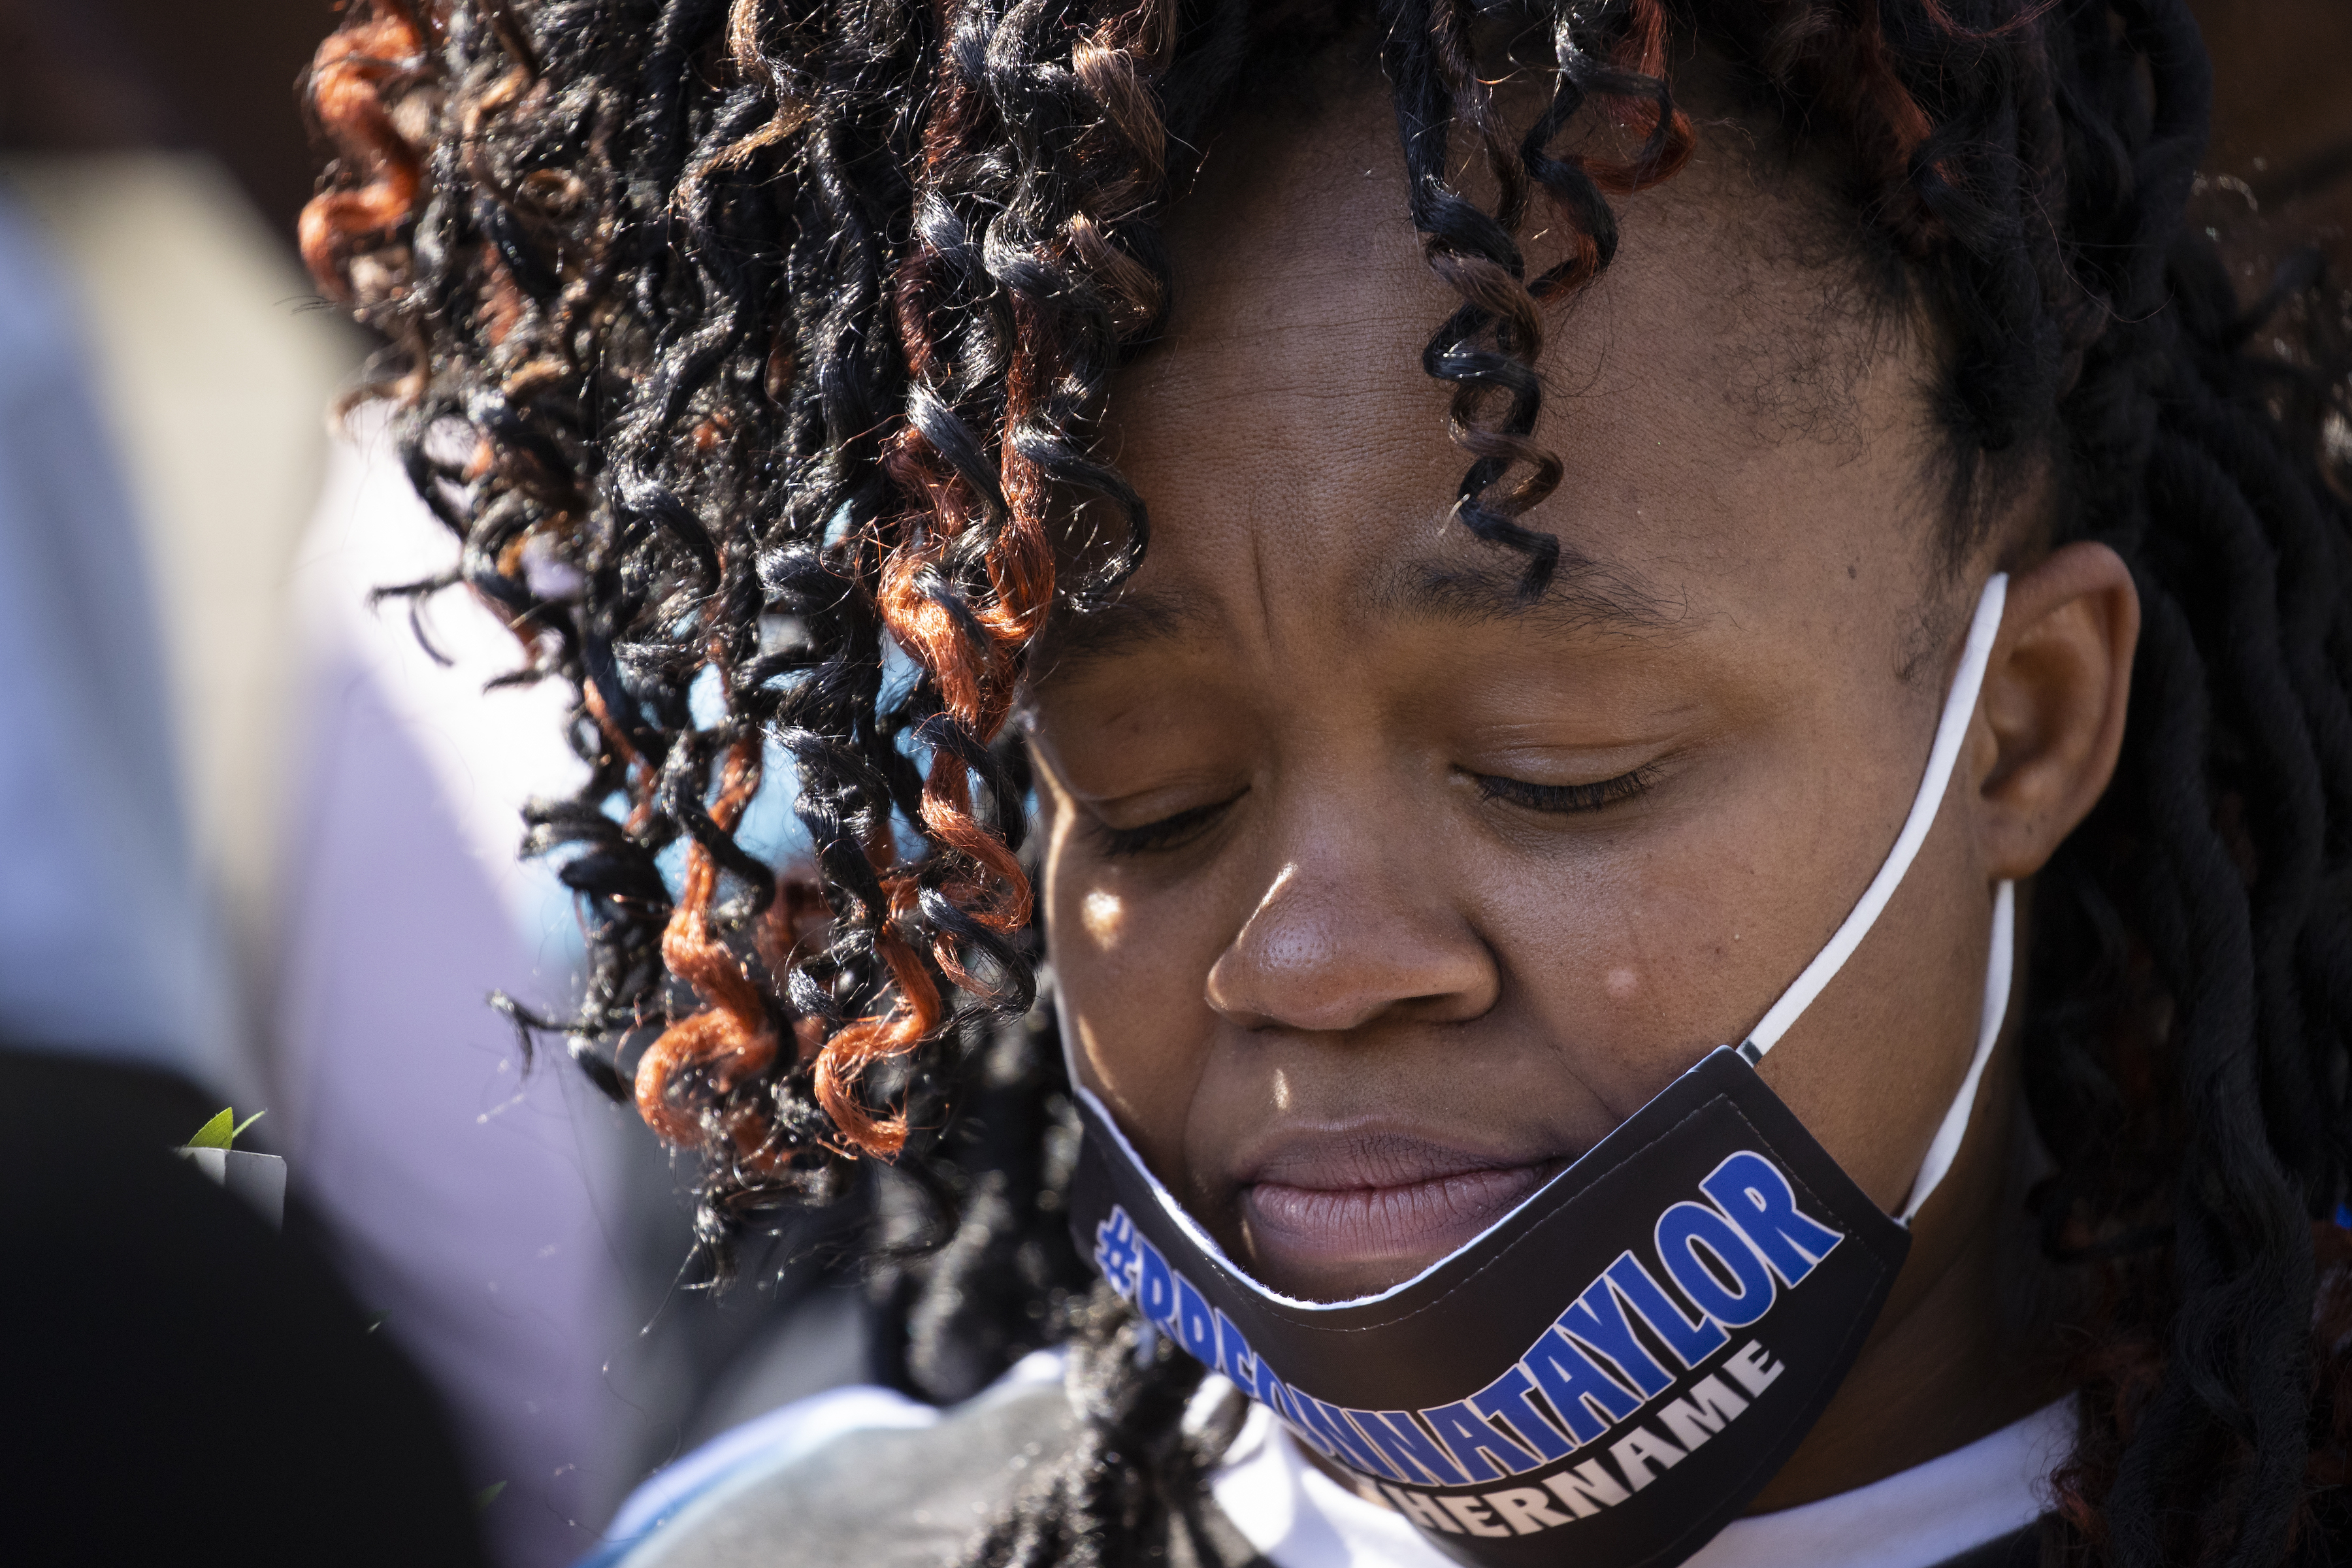 Tamika Palmer, Breonna Taylor's mother, is overcome with emotions during a vigil for her daughter on June 6, 2020 in Louisville, Kentucky.